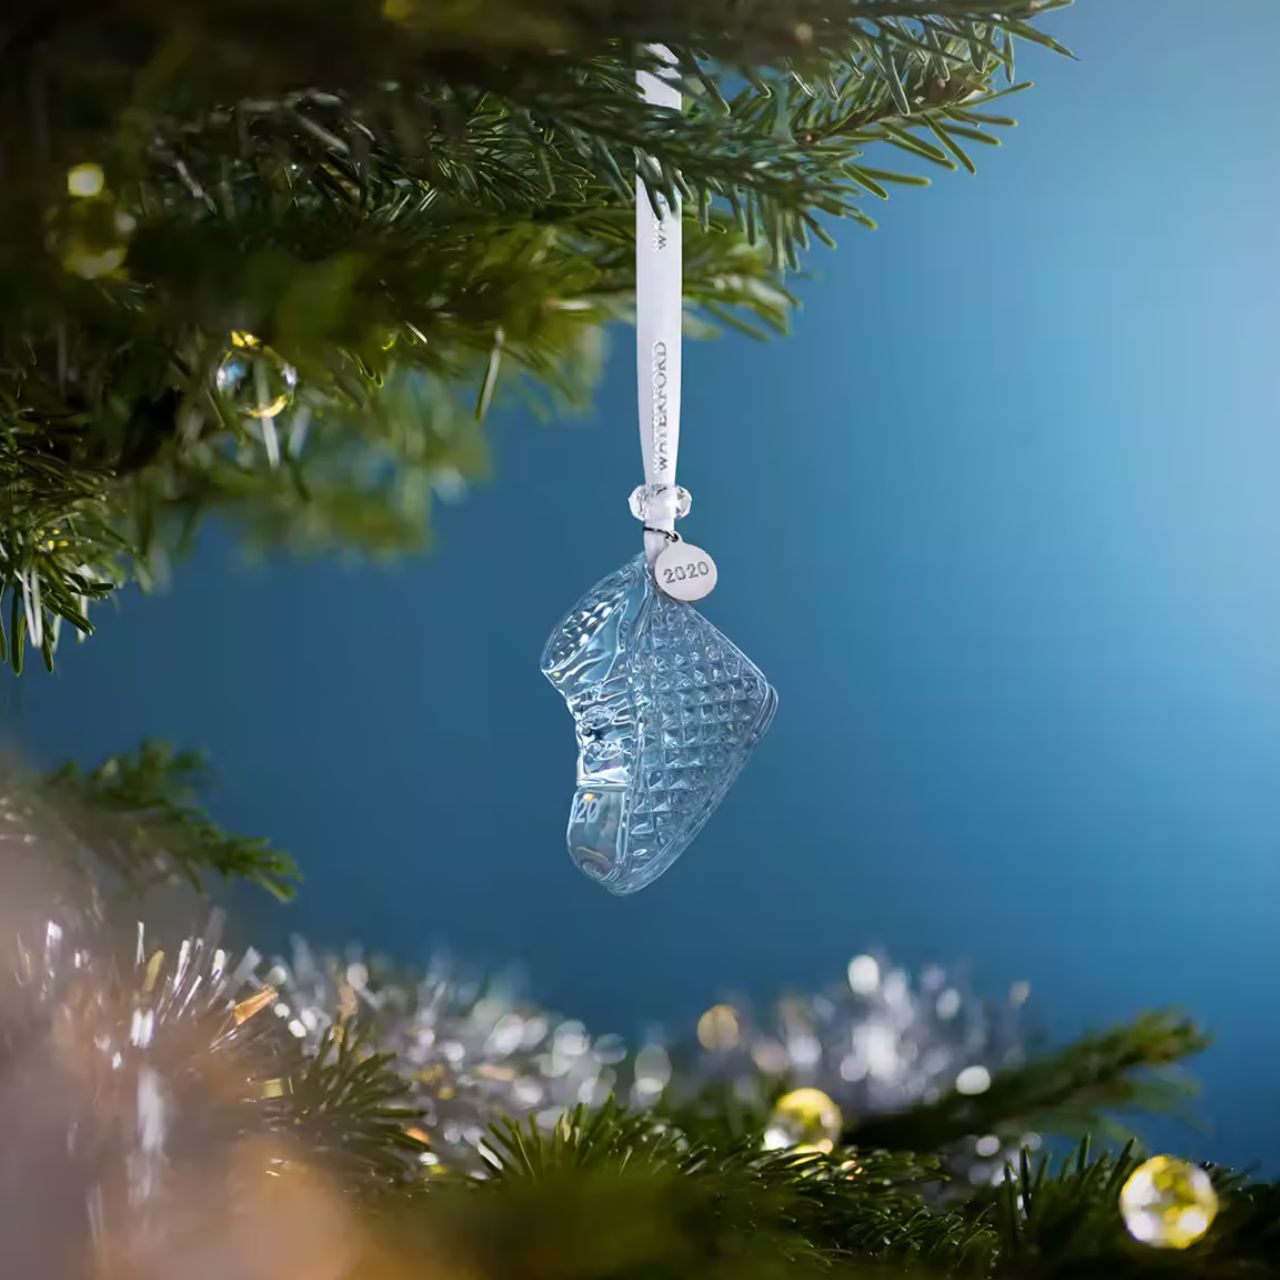 Waterford Crystal Baby's First Christmas Ornament 2020  The beautiful 2020 Baby’s First Ornament is one of Waterford’s collectable crystal ornaments. This charming baby boot features a wonderfully detailed pattern that produces unrivalled sparkle, with a round date tag to commemorate the year of Baby's First Christmas.